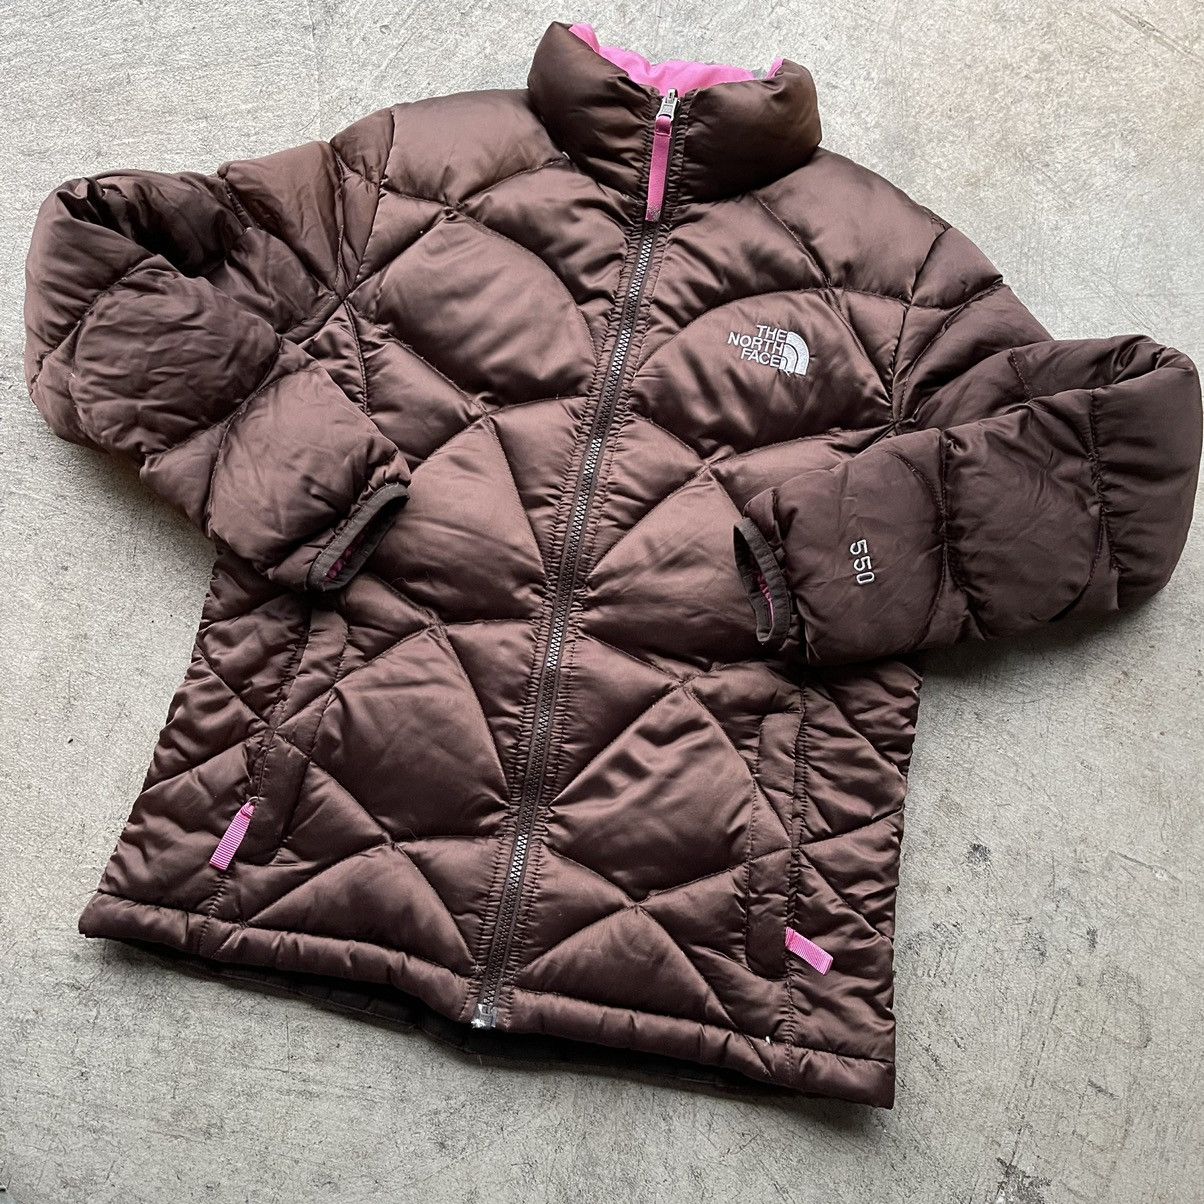 Vintage Brown North Face Puffer Jacket Nuptse 550 S Size US S / EU 44-46 / 1 - 2 Preview